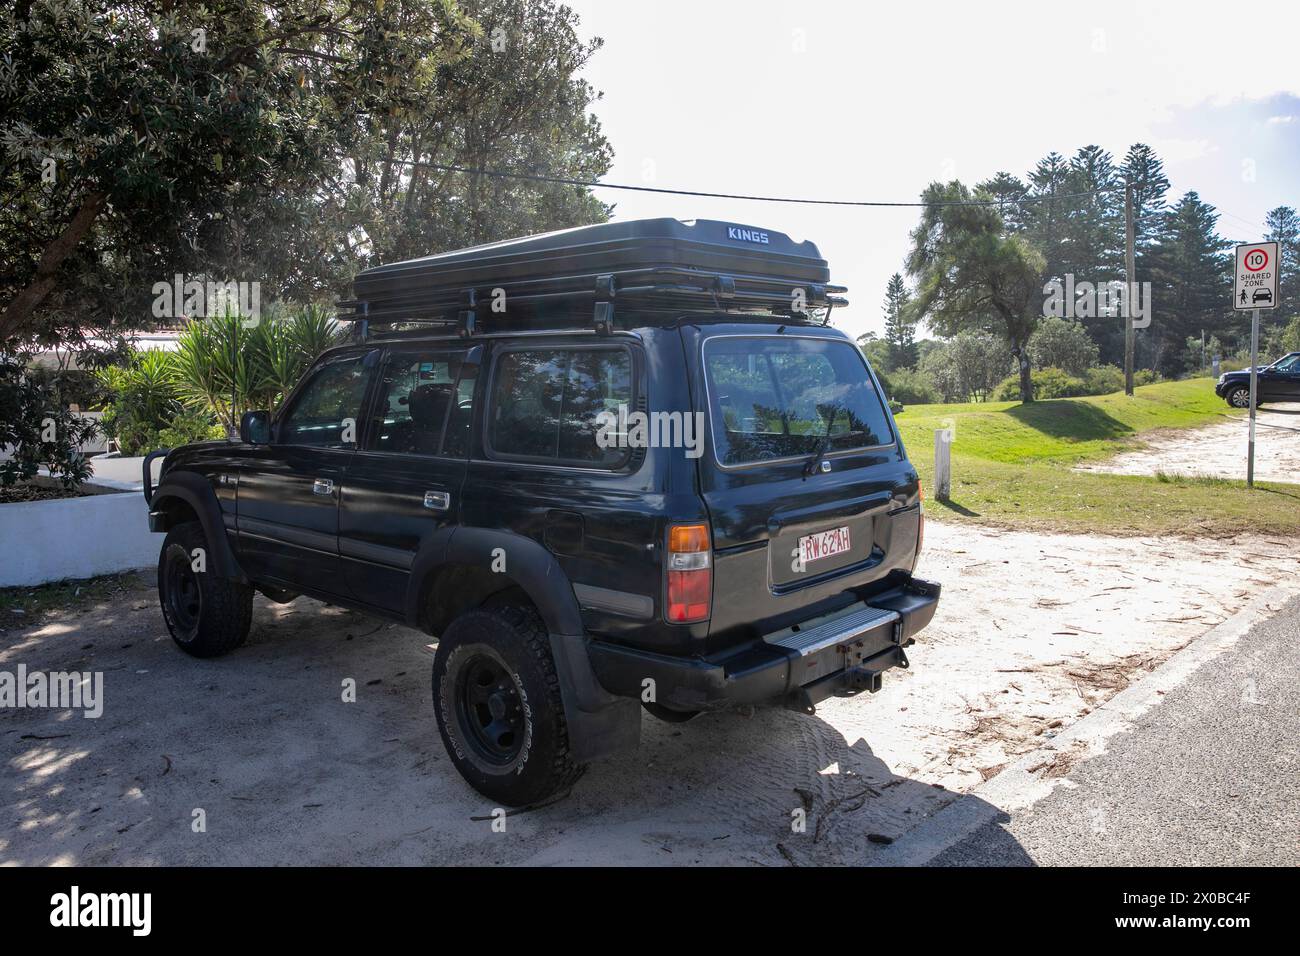 1995 model Toyota Landcruiser 80 series, parked at Palm Beach in Sydney Australia with Kings roof top tent fitted Stock Photo